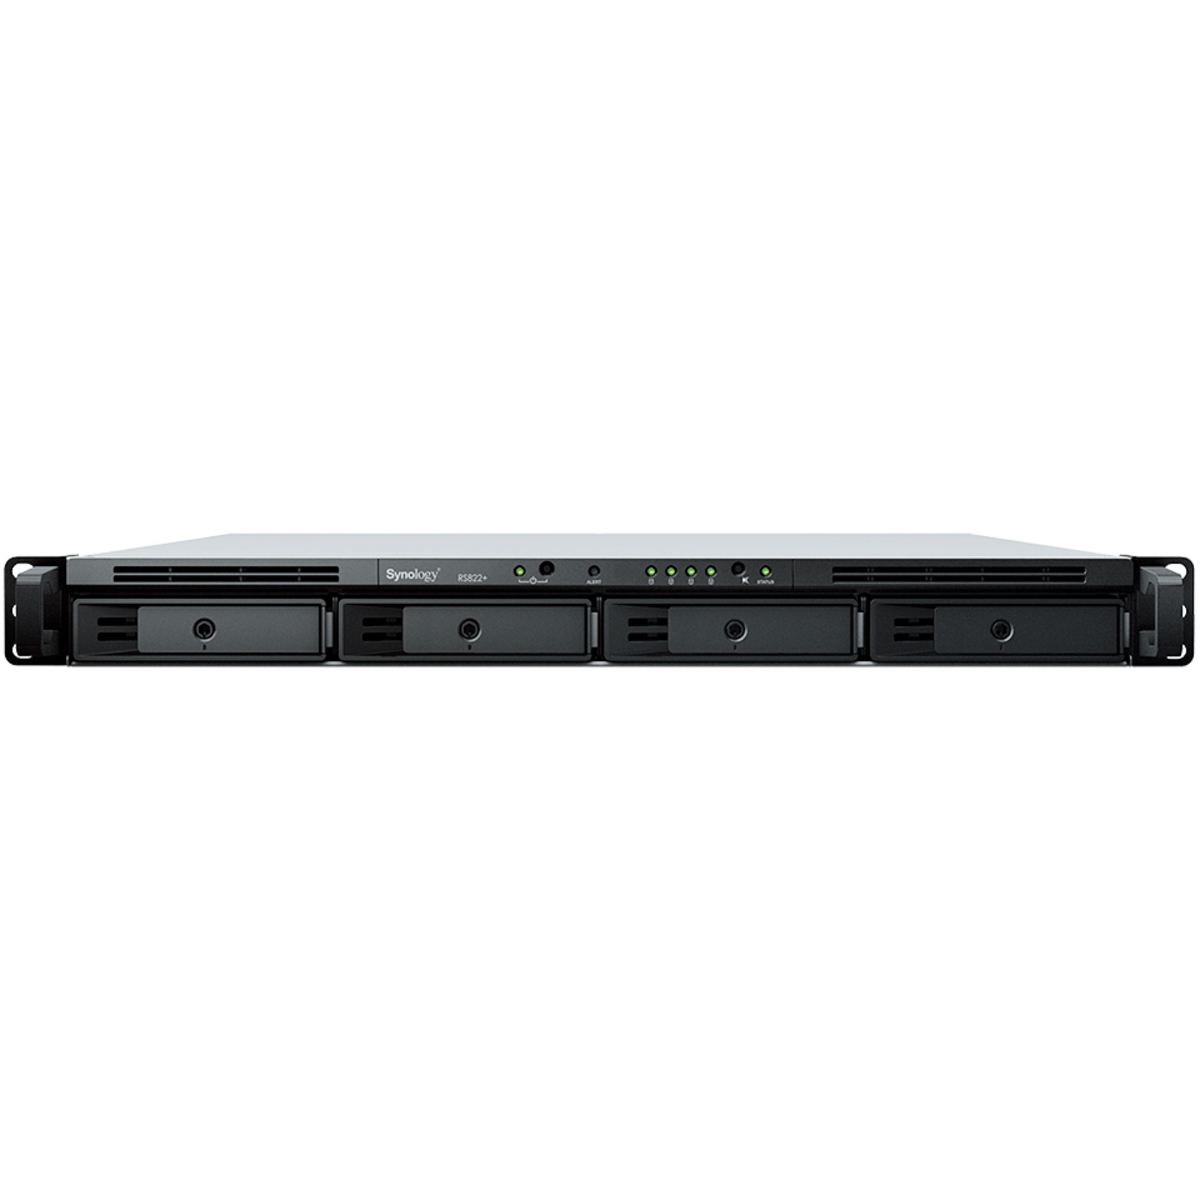 Synology RackStation RS822RP+ 24tb 4-Bay RackMount Multimedia / Power User / Business NAS - Network Attached Storage Device 3x8tb Seagate IronWolf Pro ST8000NT001 3.5 7200rpm SATA 6Gb/s HDD NAS Class Drives Installed - Burn-In Tested - ON SALE - FREE RAM UPGRADE RackStation RS822RP+